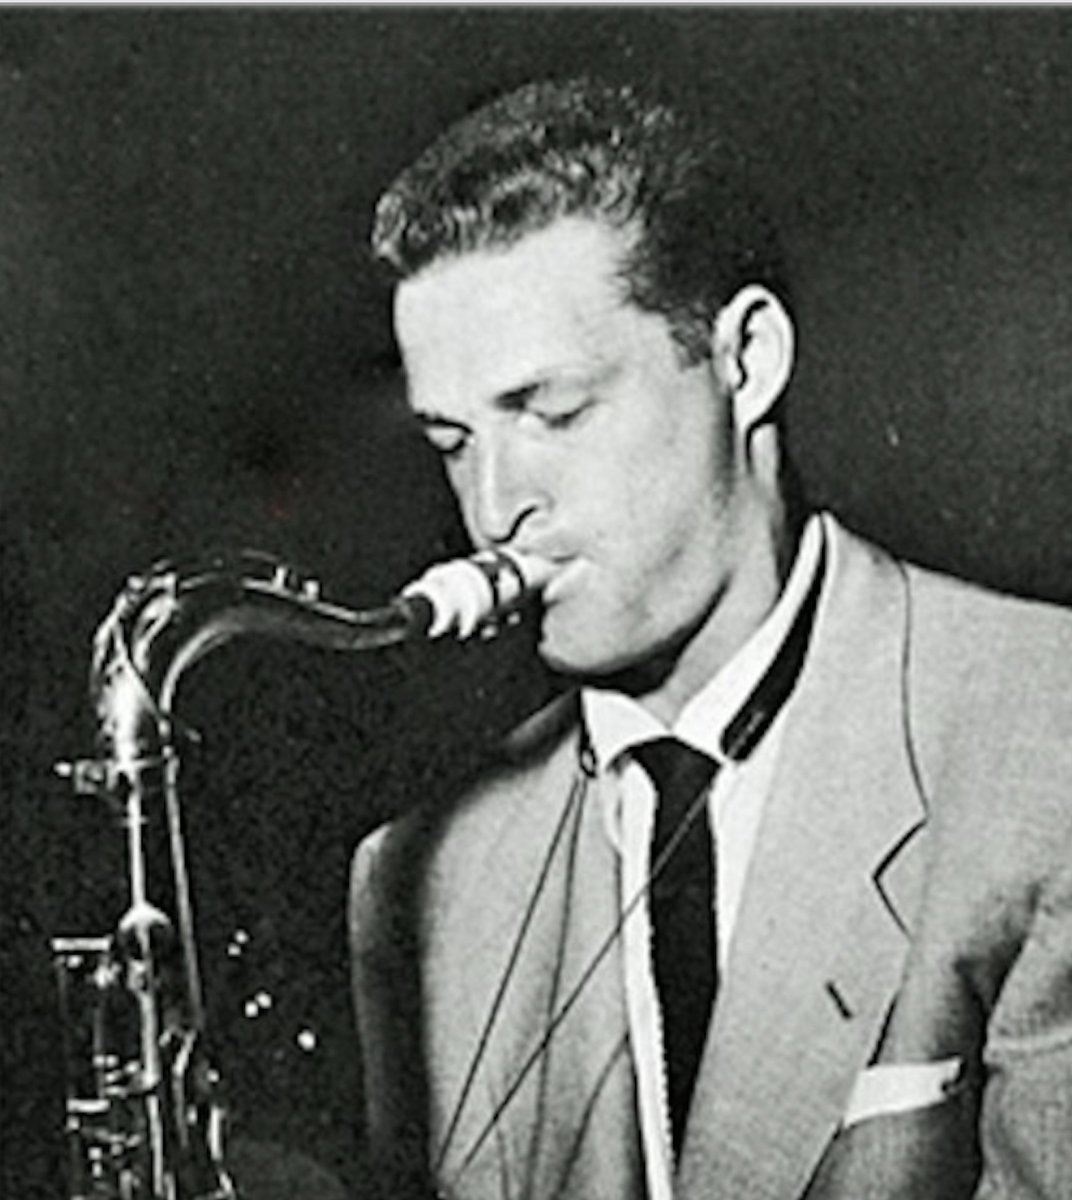 Wednesday at JazzWax, paying tribute to the late Bill Holman, the last of the towering arrangers who helped develop and define the West Coast jazz sound for small groups and big bands. Go here... tinyurl.com/3pdzjf9e